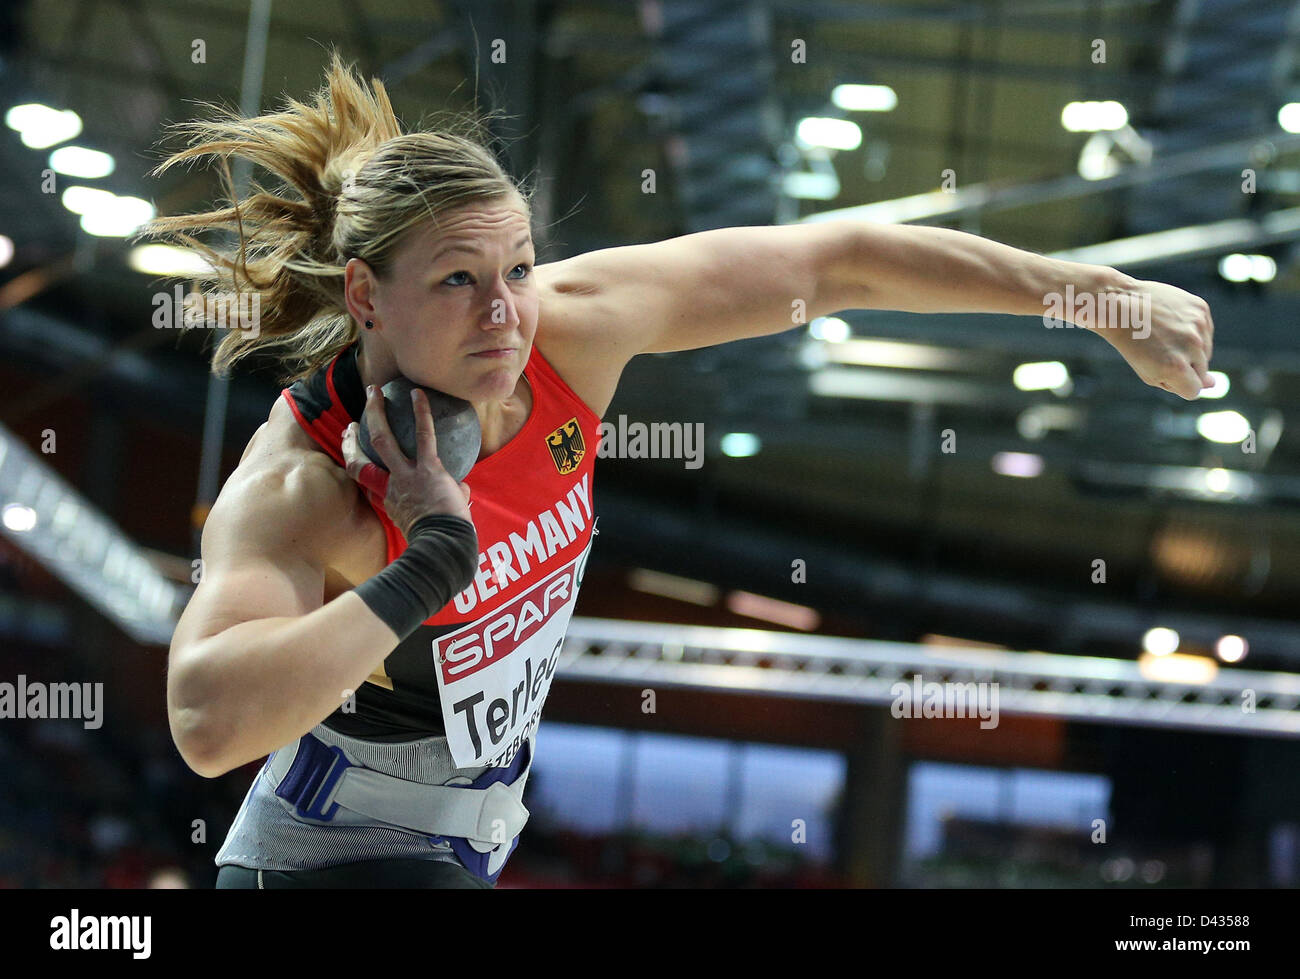 Germany's Josephine Terlecki competes in the women's shot put final during the IAAF European Athletics Indoor Championships 2013 in the Scandinavium Arena in Gothenburg, Sweden, March 3, 2013. Foto: Christian Charisius/dpa +++(c) dpa - Bildfunk+++ Stock Photo